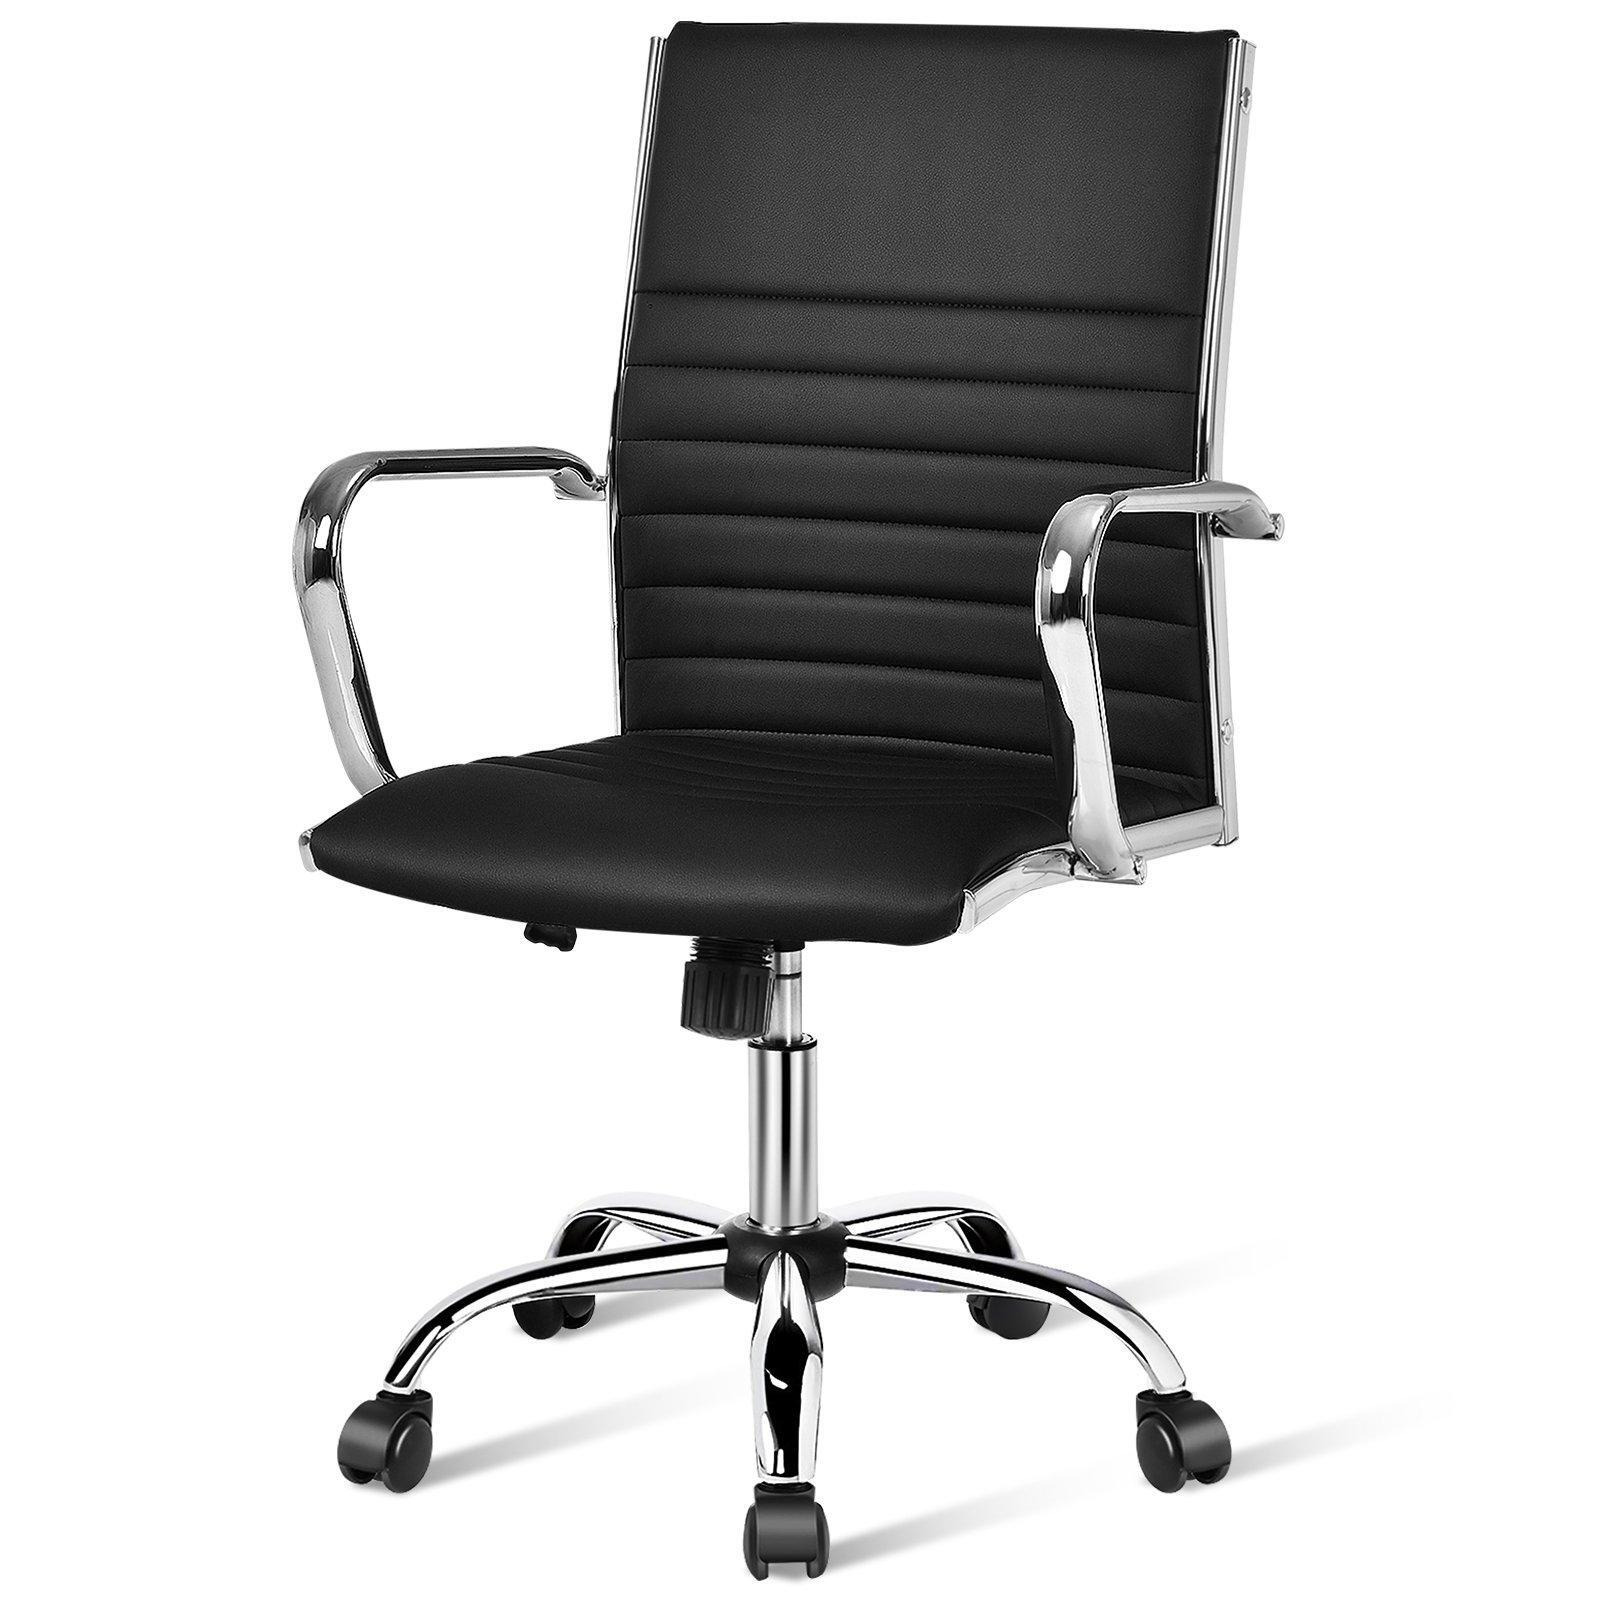 Executive Office Chair Ergonomic High Back PU Leather Swivel Computer Desk Chair - image 1